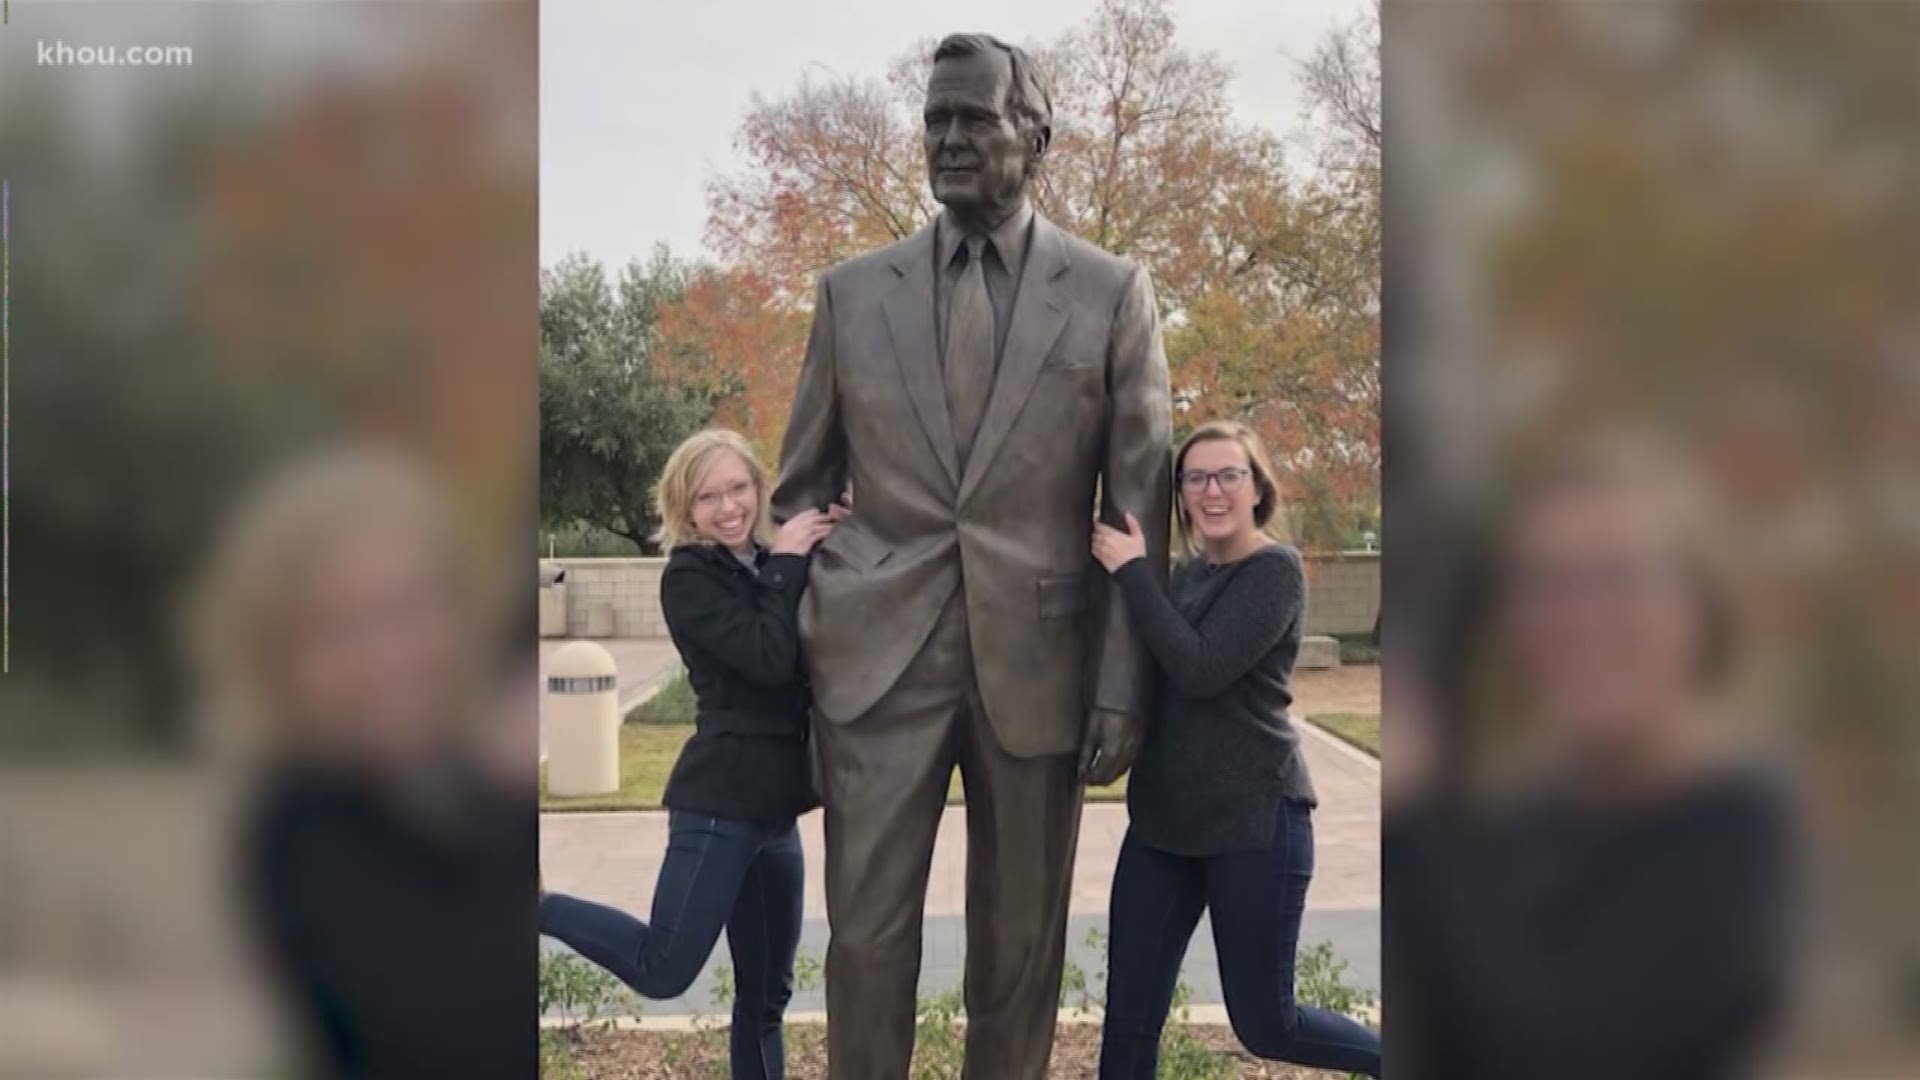 Texas A&M University is preparing for the burial of President George H.W. Bush at his library.